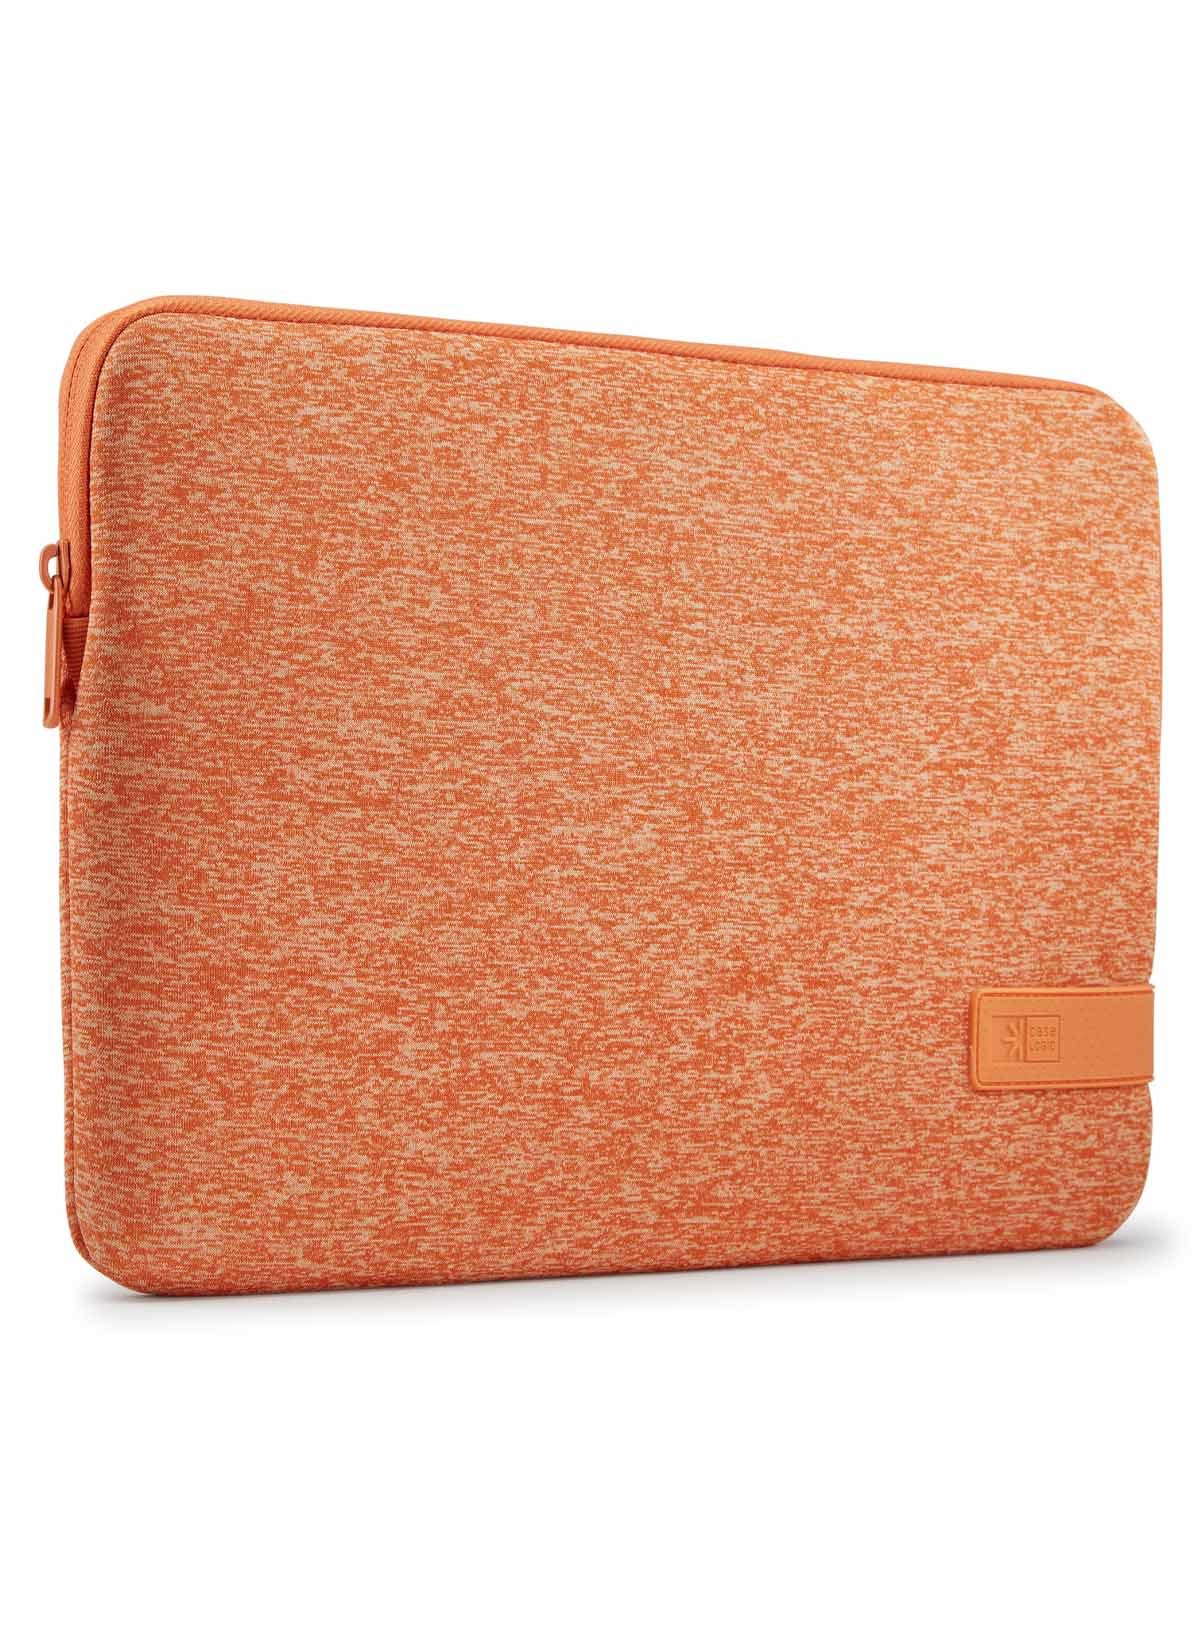 CASE LOGIC Reflect Notebook Polyester, Coral Sleeve Gold/Apricot Sleeve für Universal